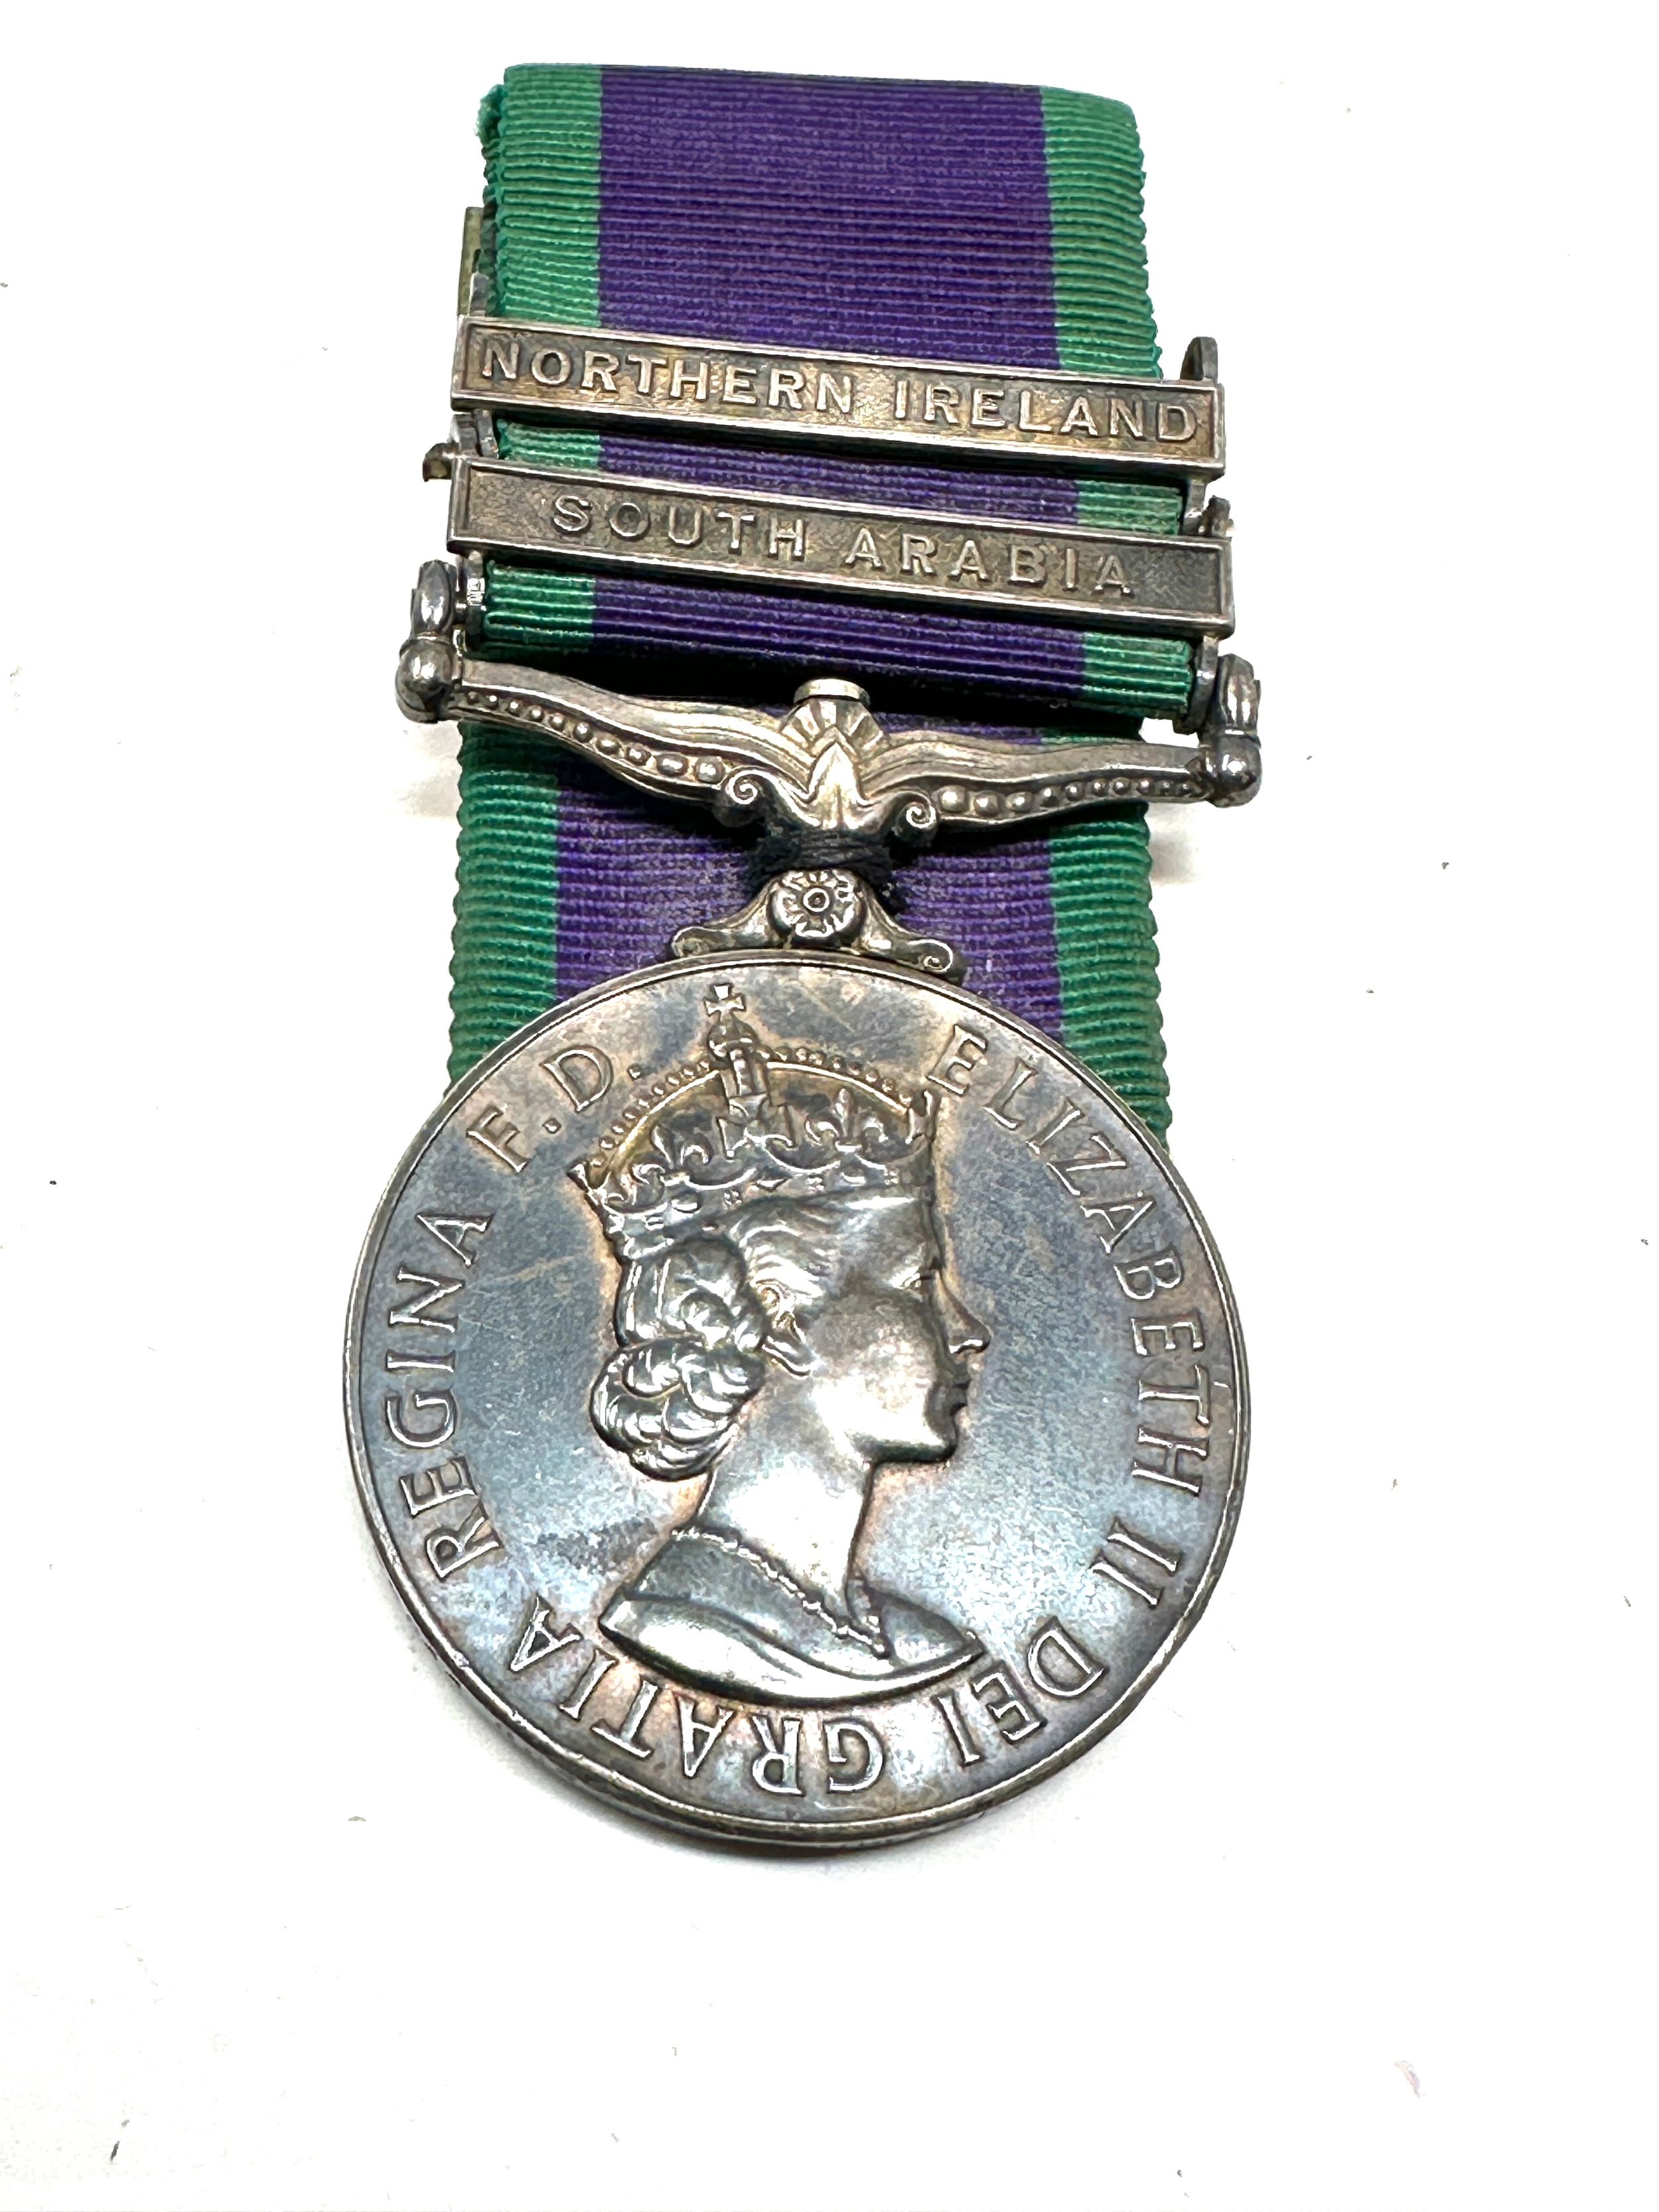 ER.11 C.S.M south arabia - northern ireland to 24000844 gdsm.t.woodward coldstream guards